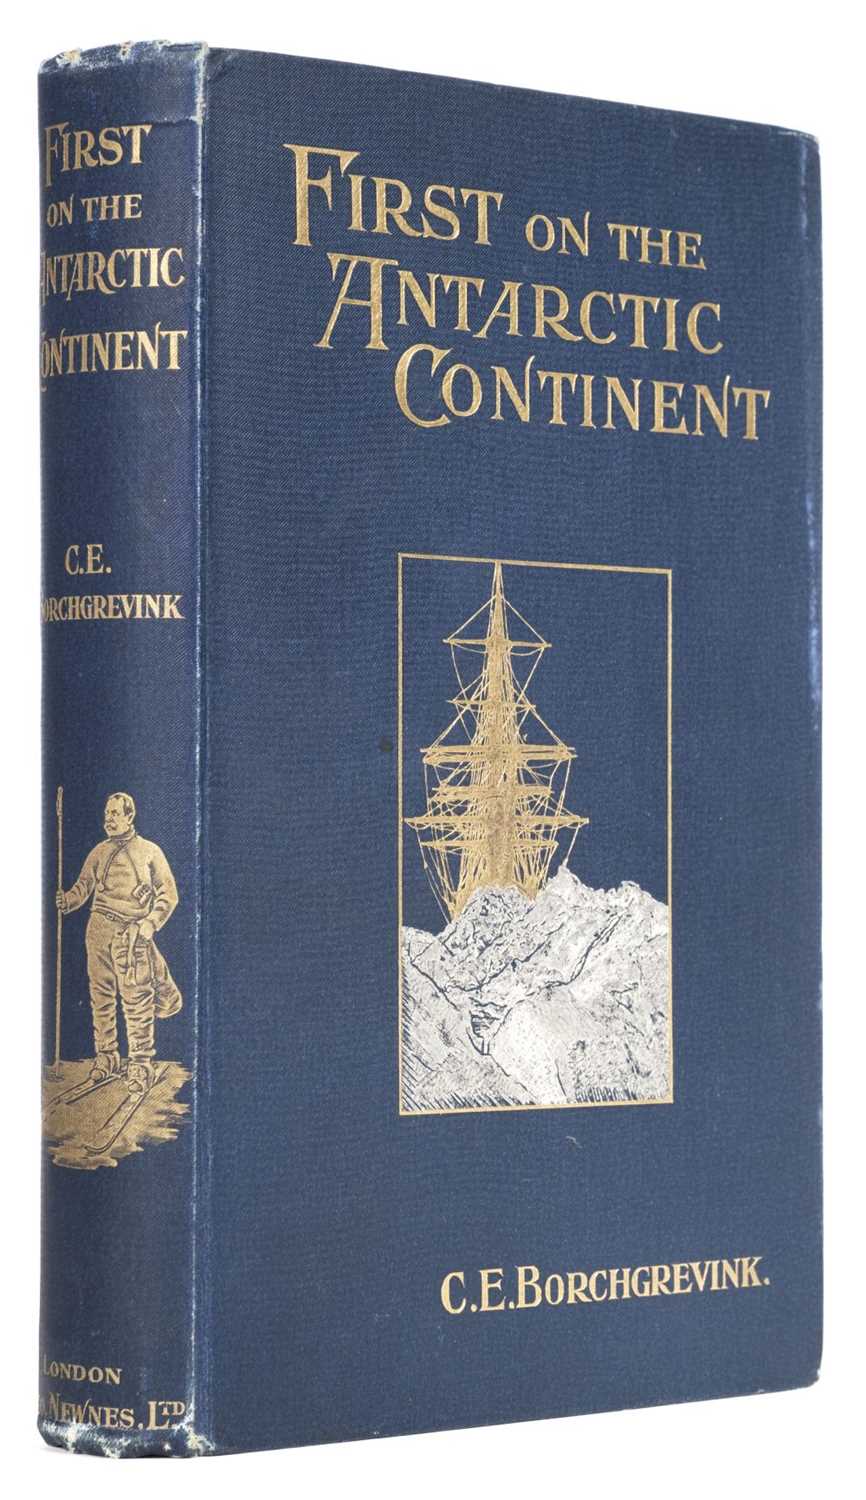 Lot 6 - Borchgrevink (Carsten). First on the Antarctic Continent, 1st edition, London: George Newnes, 1901